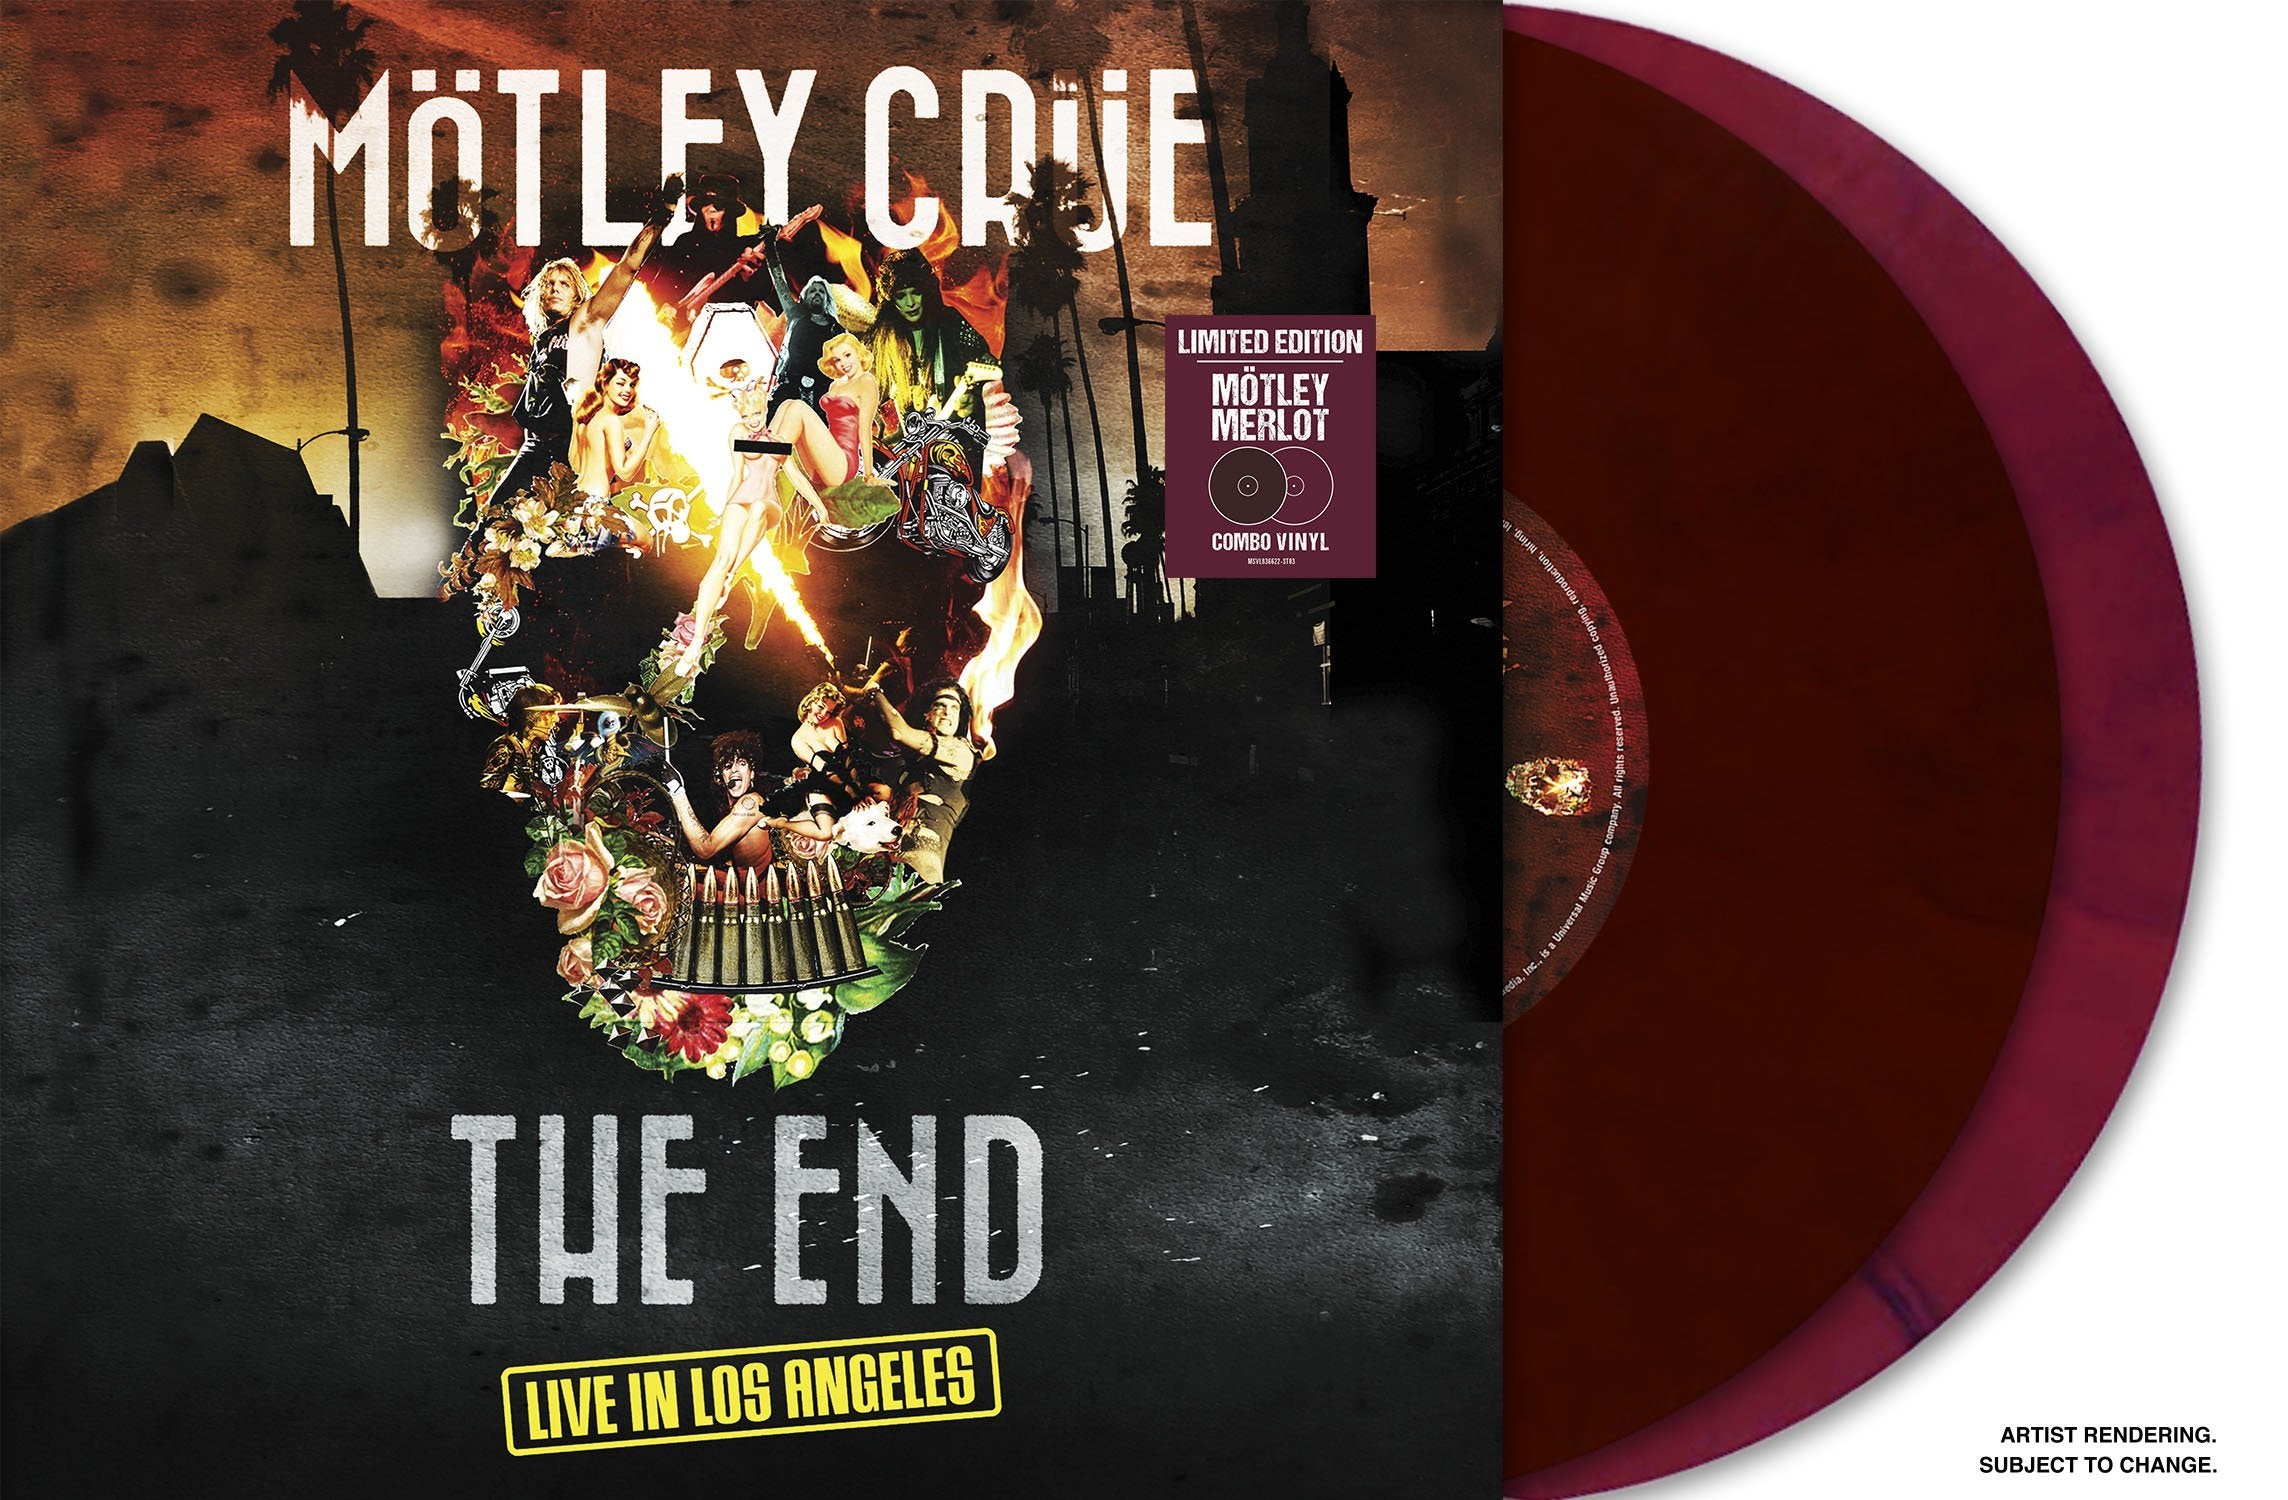 MOTLEY CRUE 'THE END - LIVE IN LOS ANGELES' LIMITED-EDITION MOTLEY MERLOT 2LP – ONLY 650 MADE